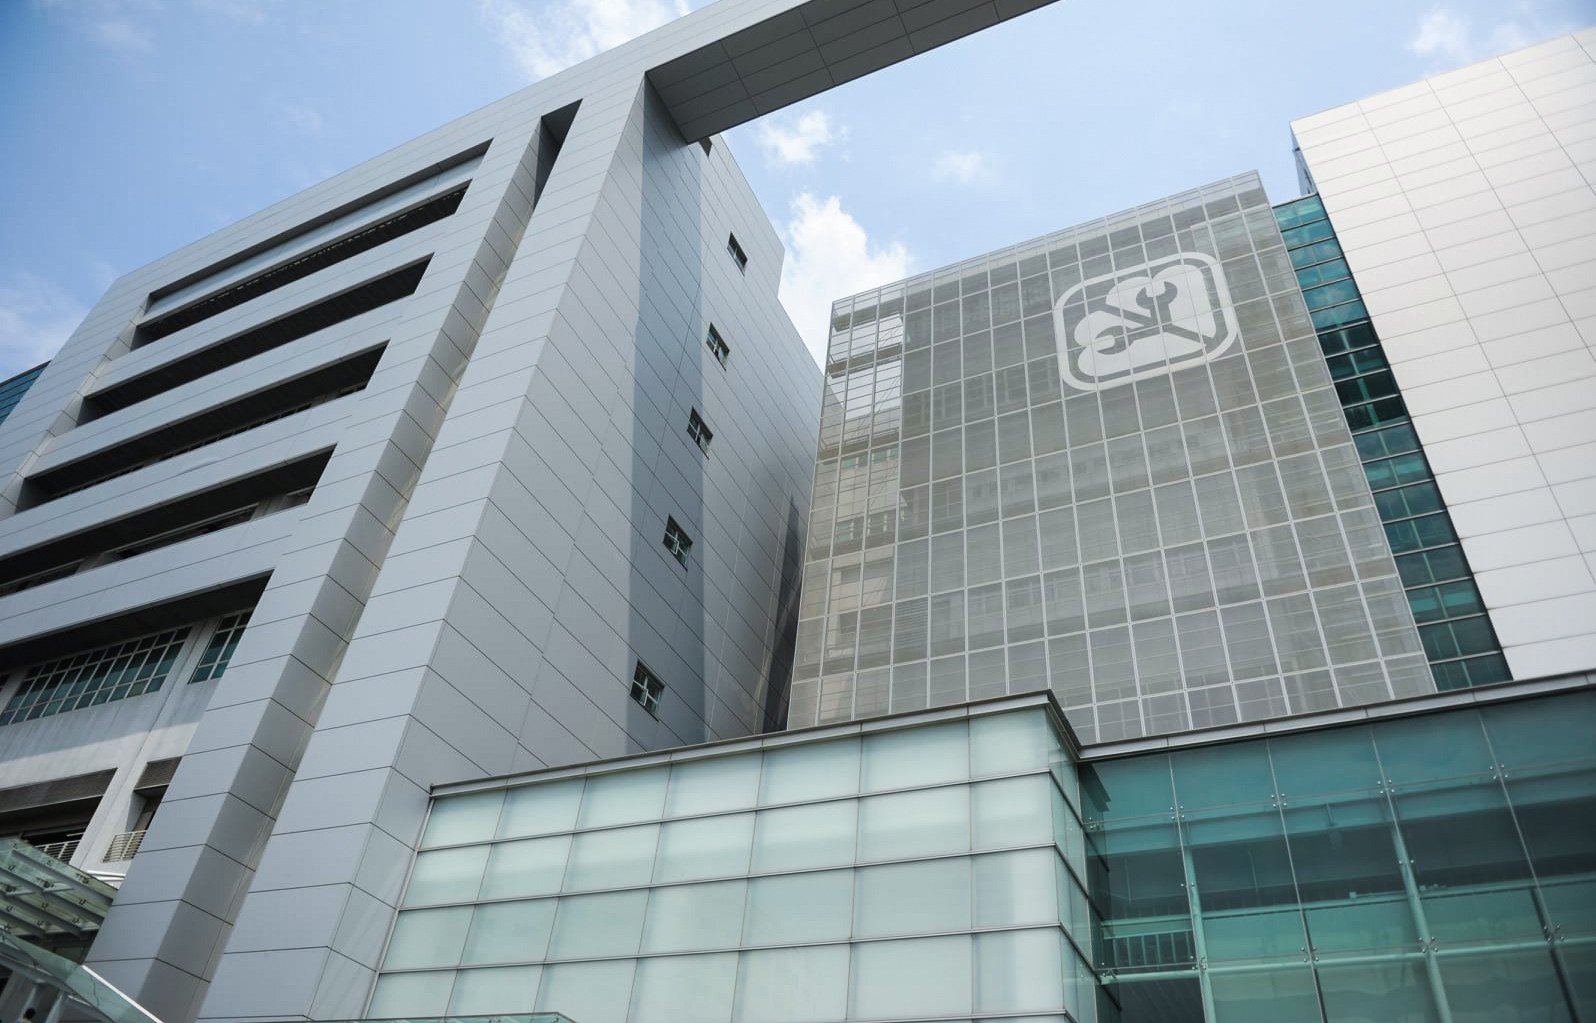 The Electrical and Mechanical Services Department’s headquarters in Kowloon Bay. Photo: Handout